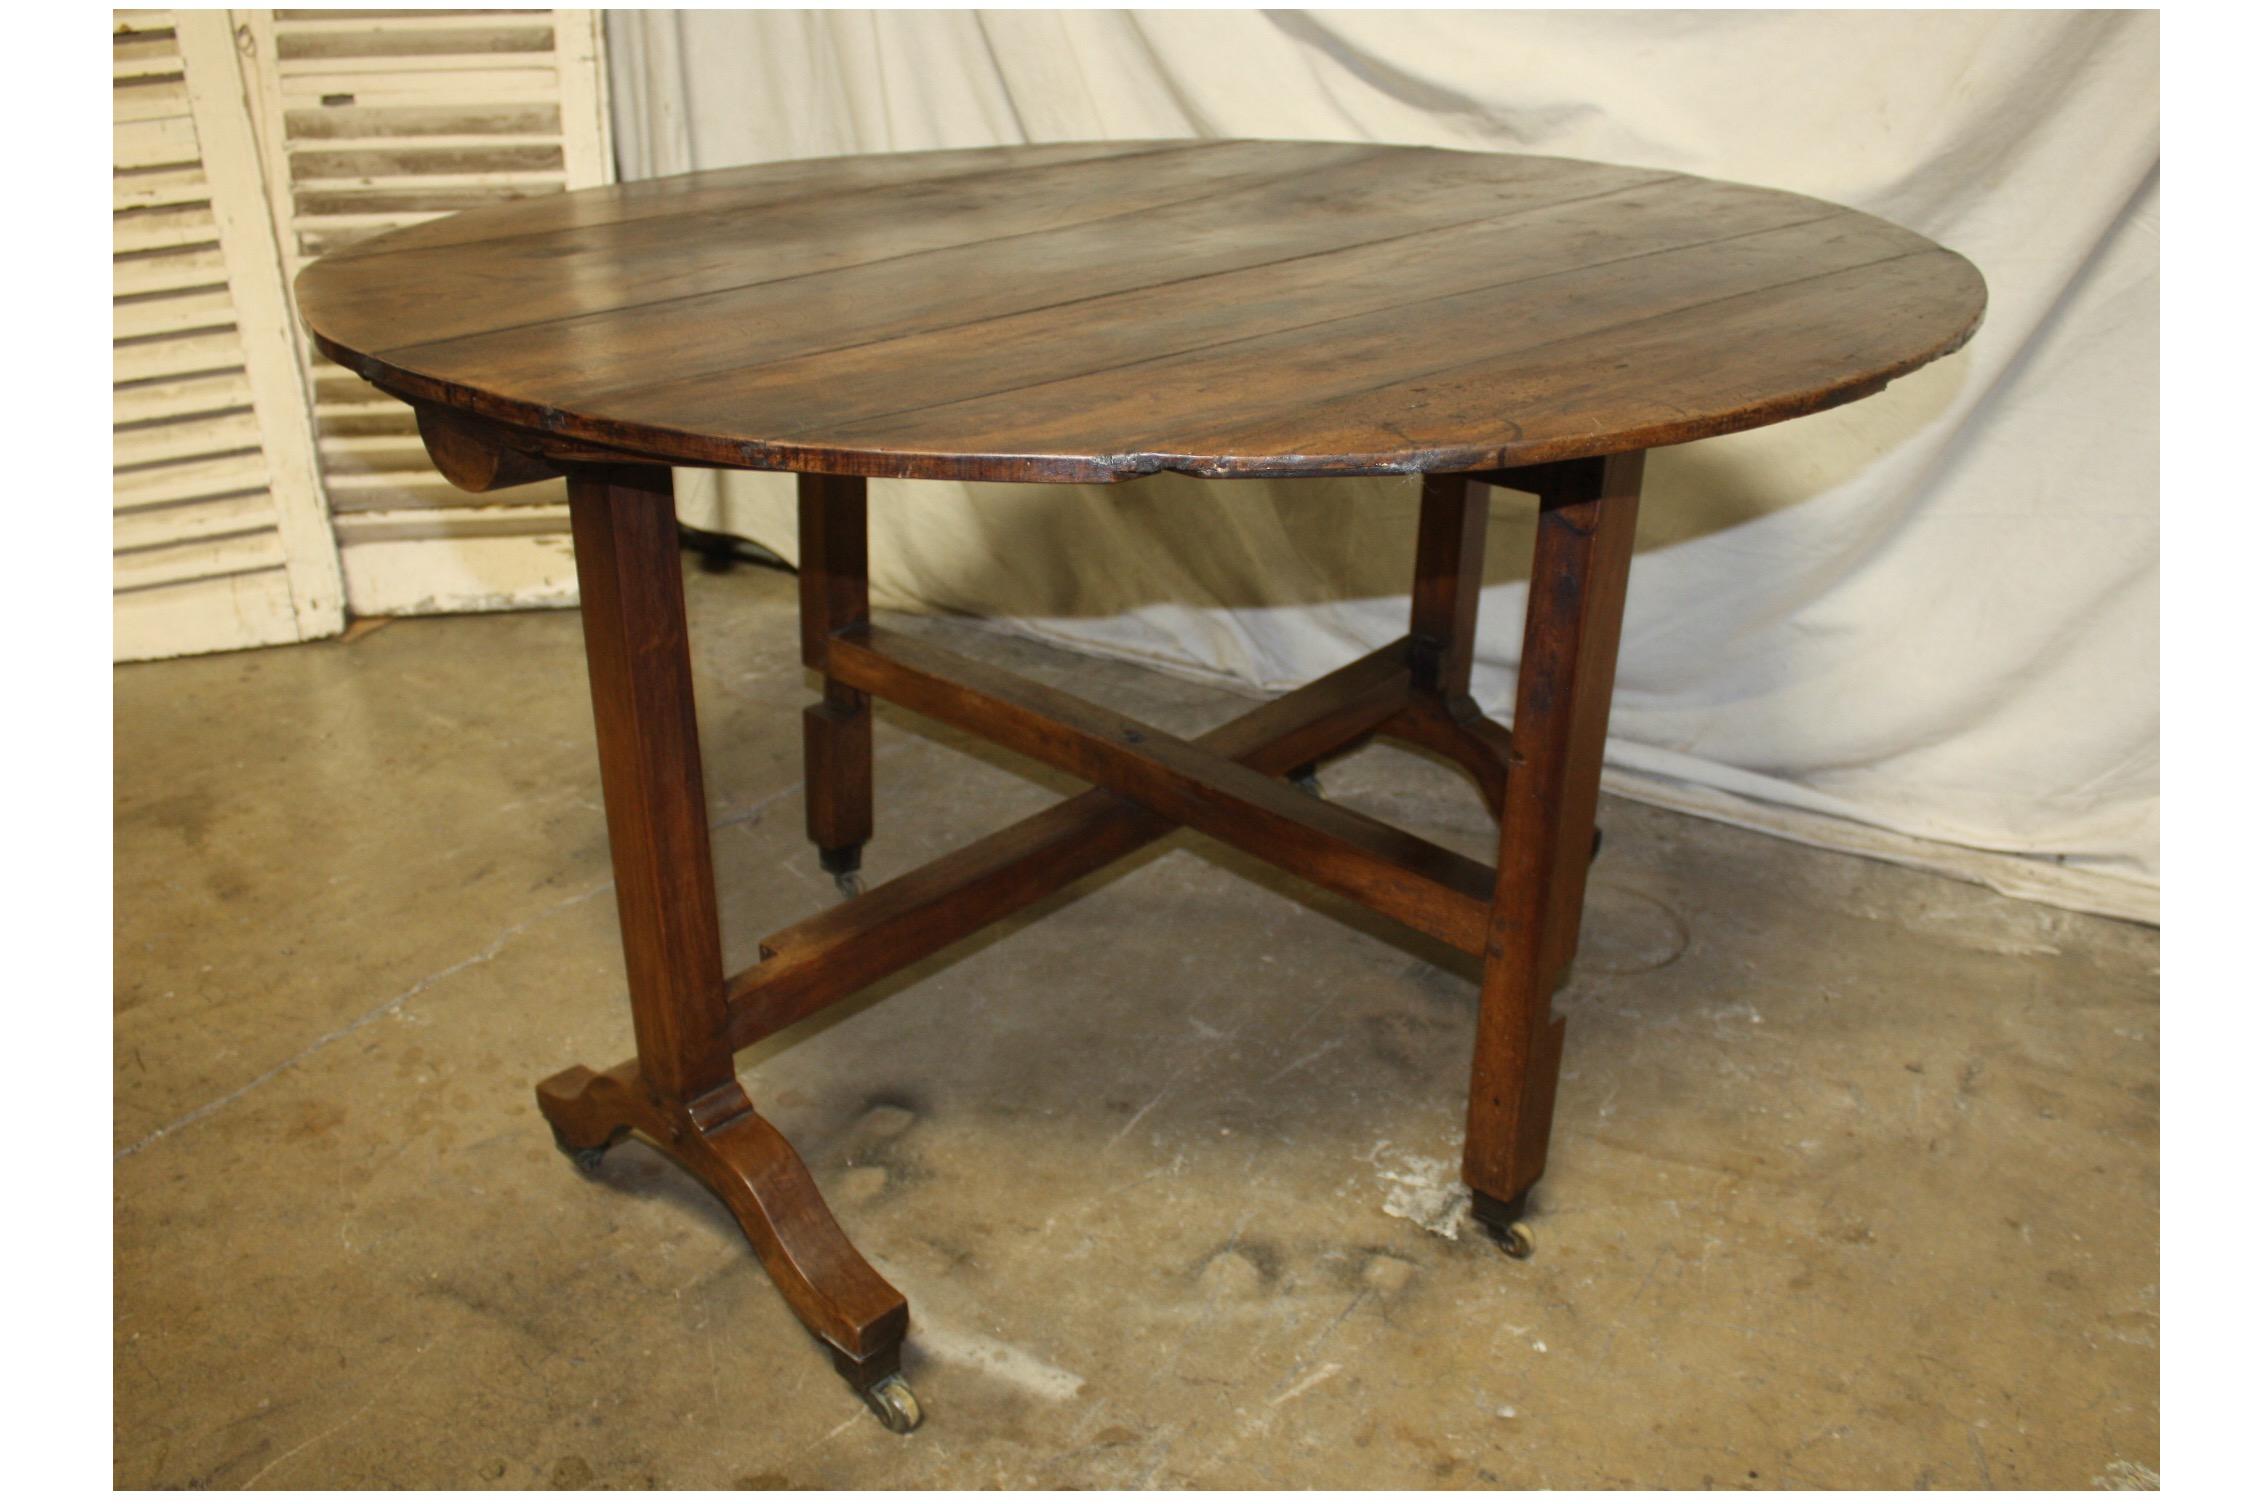 Early 19th century French wine table. The top is a flamed walnut wood and the feet wears its original rolls.